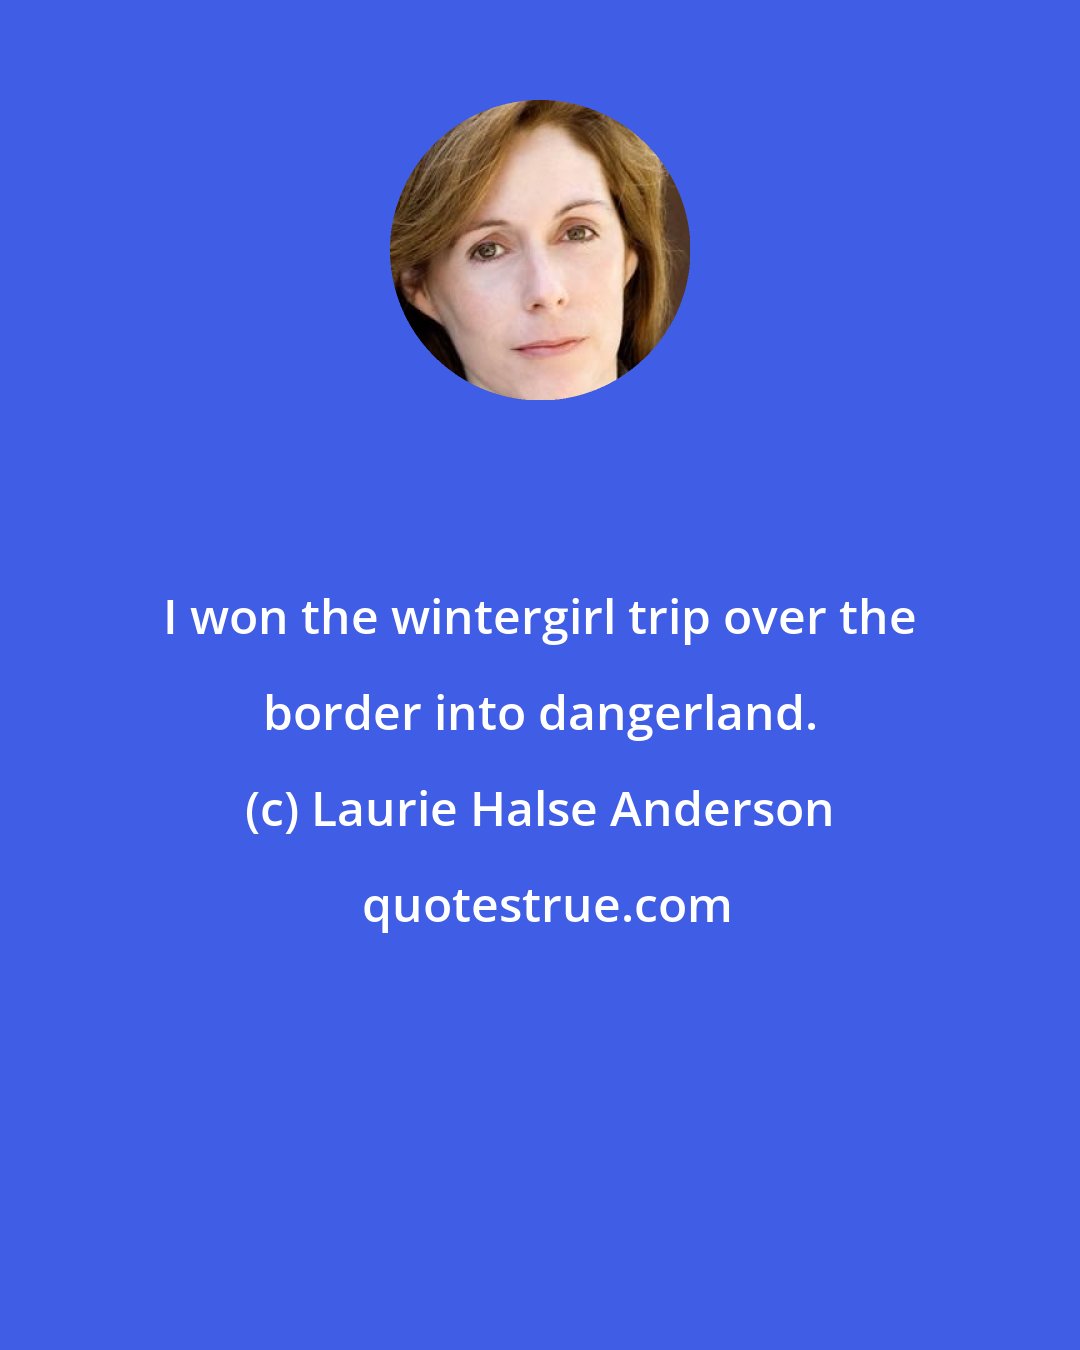 Laurie Halse Anderson: I won the wintergirl trip over the border into dangerland.